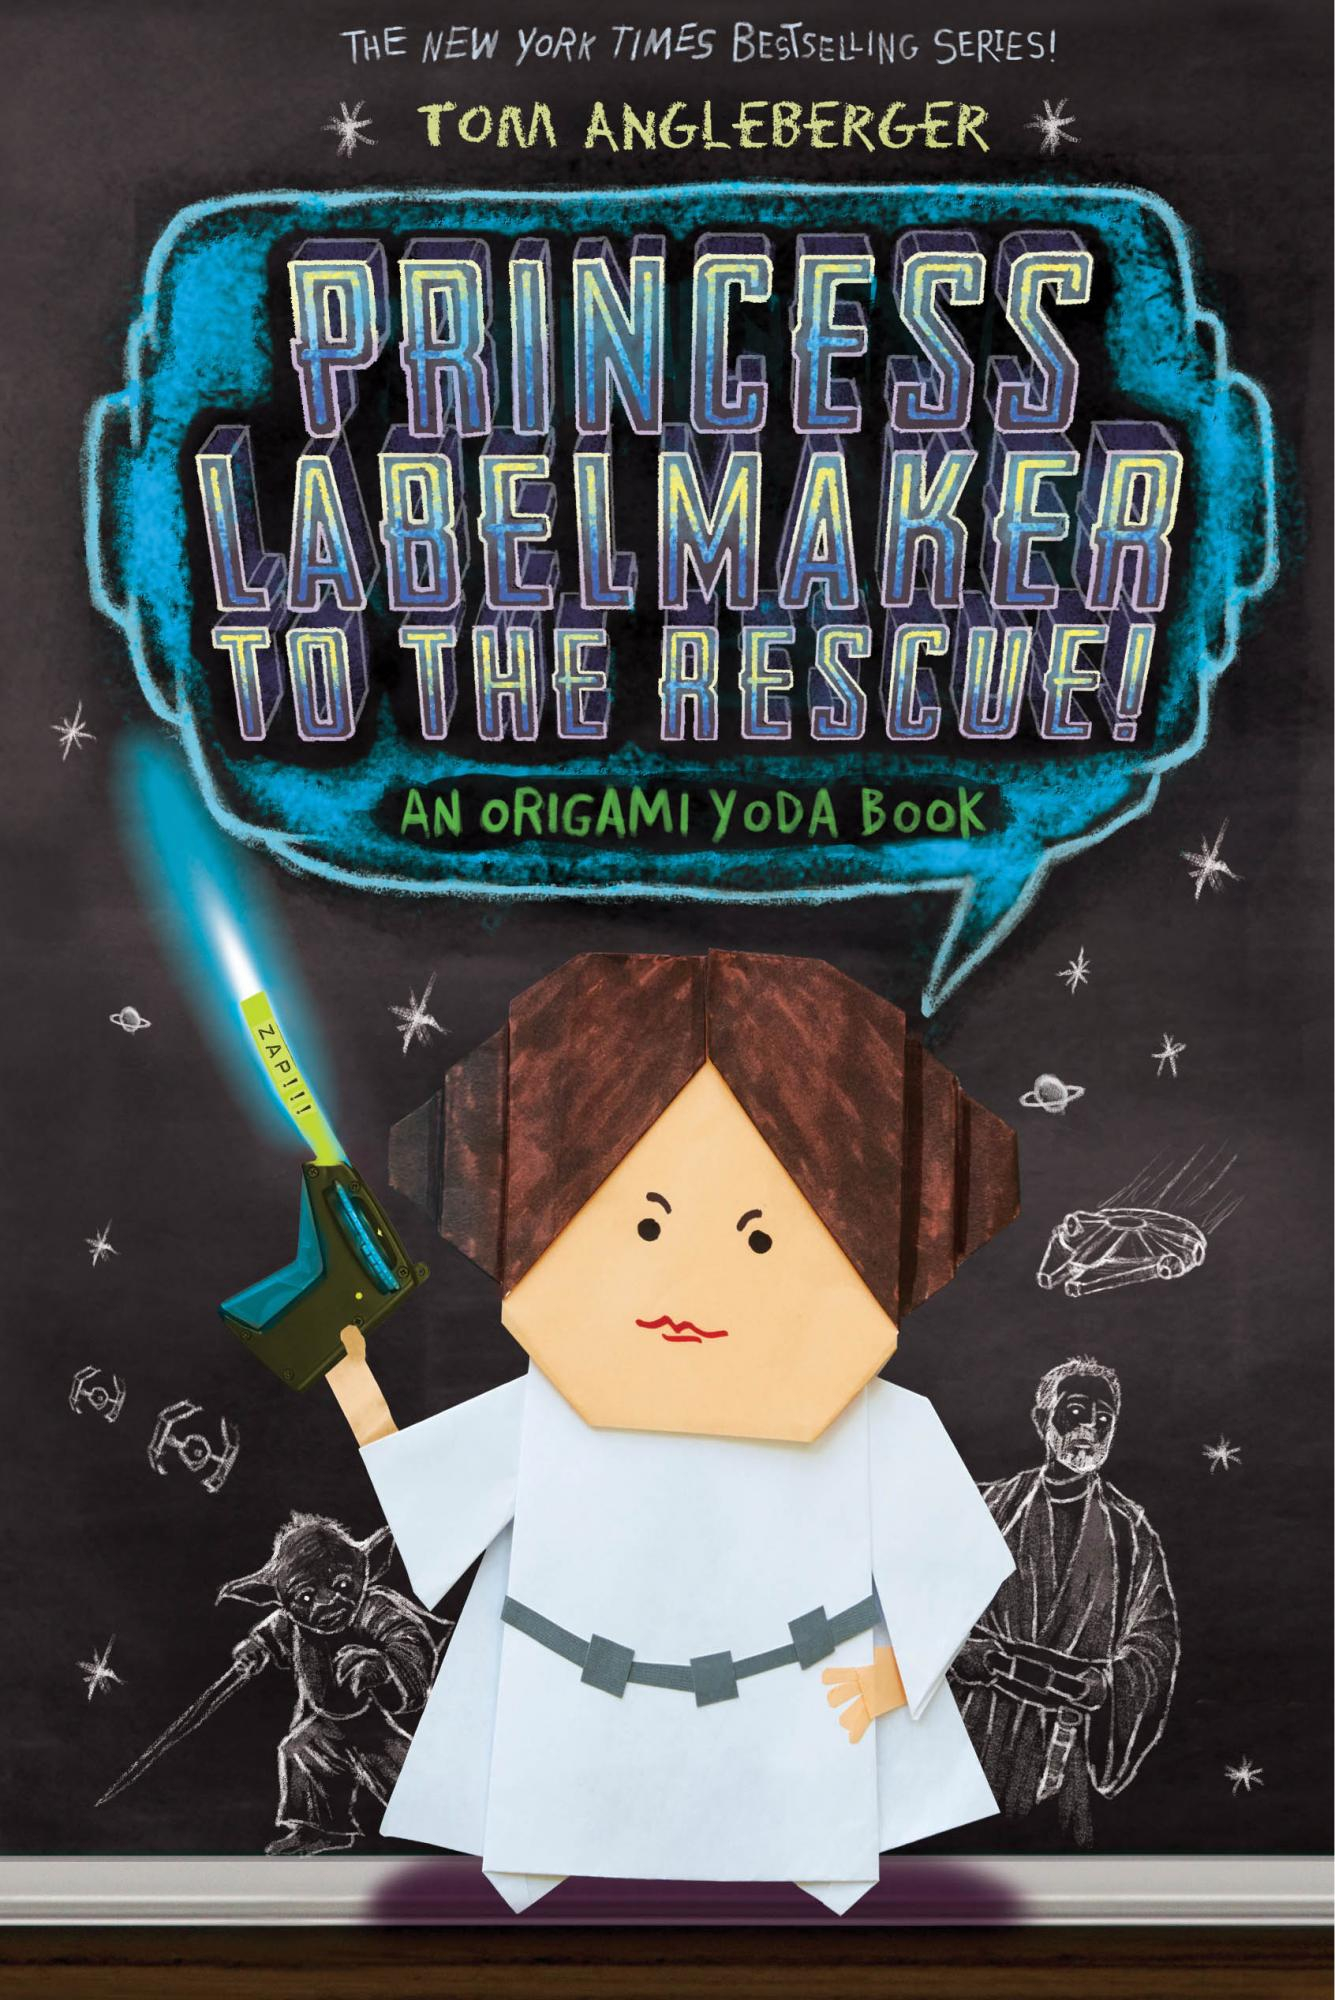 Funtime Origami Yoda Princess Labelmaker To The Rescue An Origami Yoda Book Abrams Chronicle Books